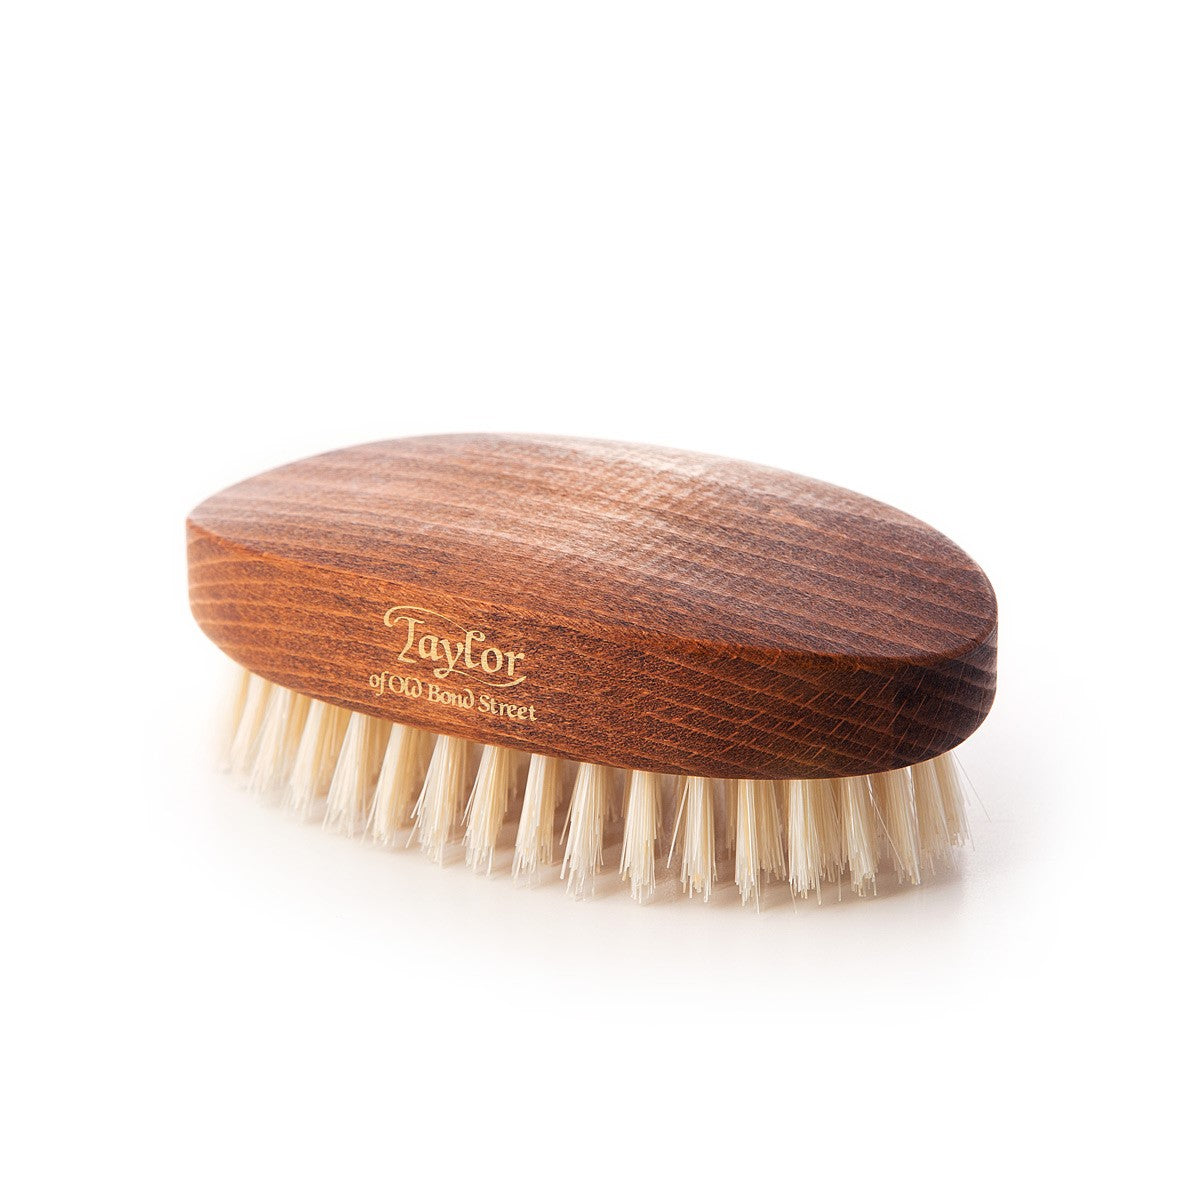 Wooden Backed Military Hairbrush